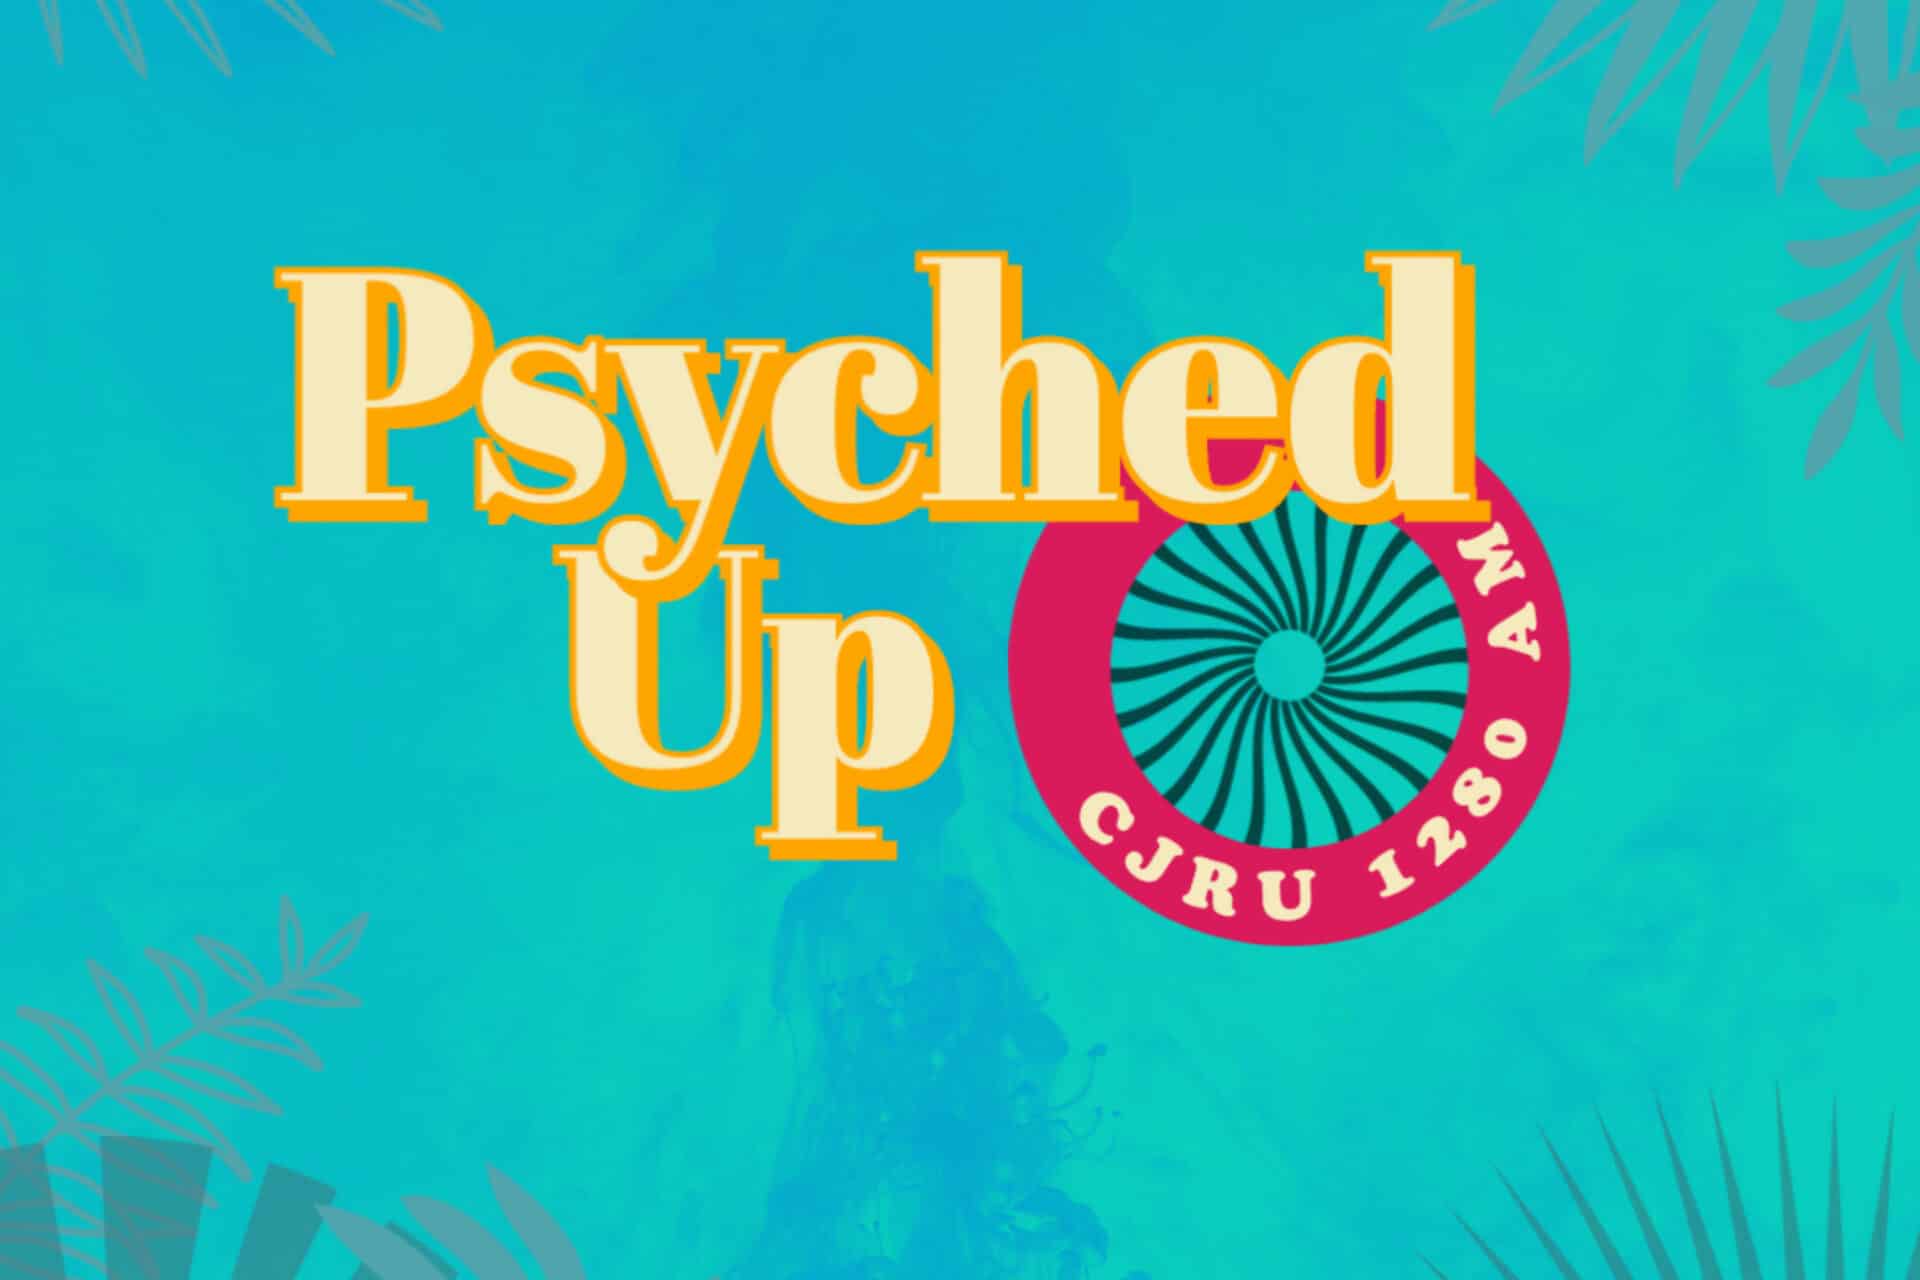 Psyched up logo